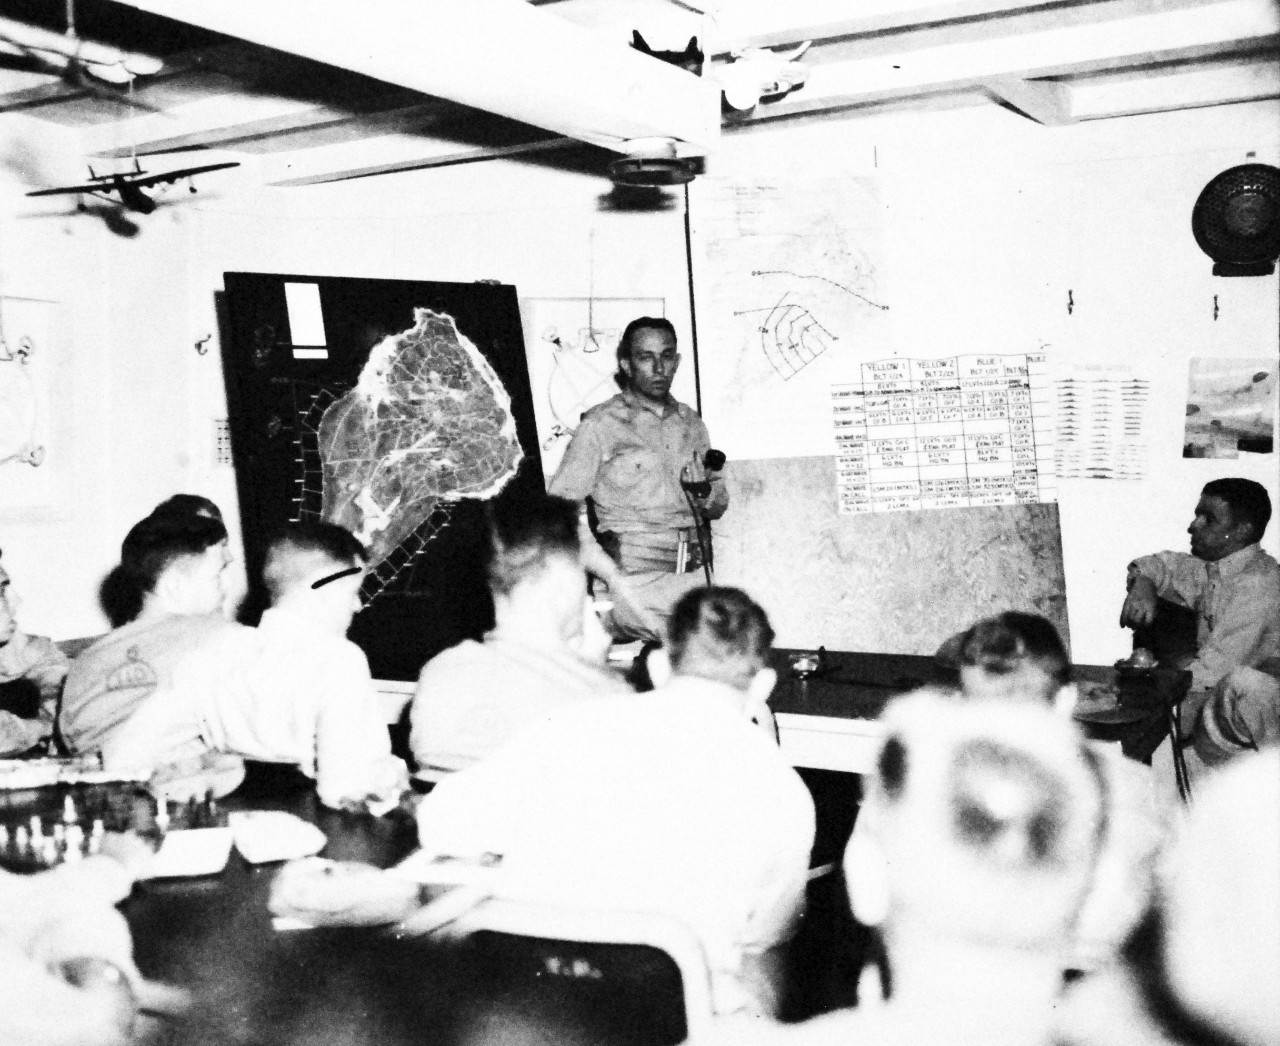 127-GW-302-142481:  Battle for Iwo Jima, February-March 1945.   Pre-invasion briefing, Colonel Edwin A. Pollock discussing landing phases of operation.  Photographed by Morejohn, 1945.  Official U.S. Marine Corps photograph, now in the collections of the National Archives.  (2016/02/17).